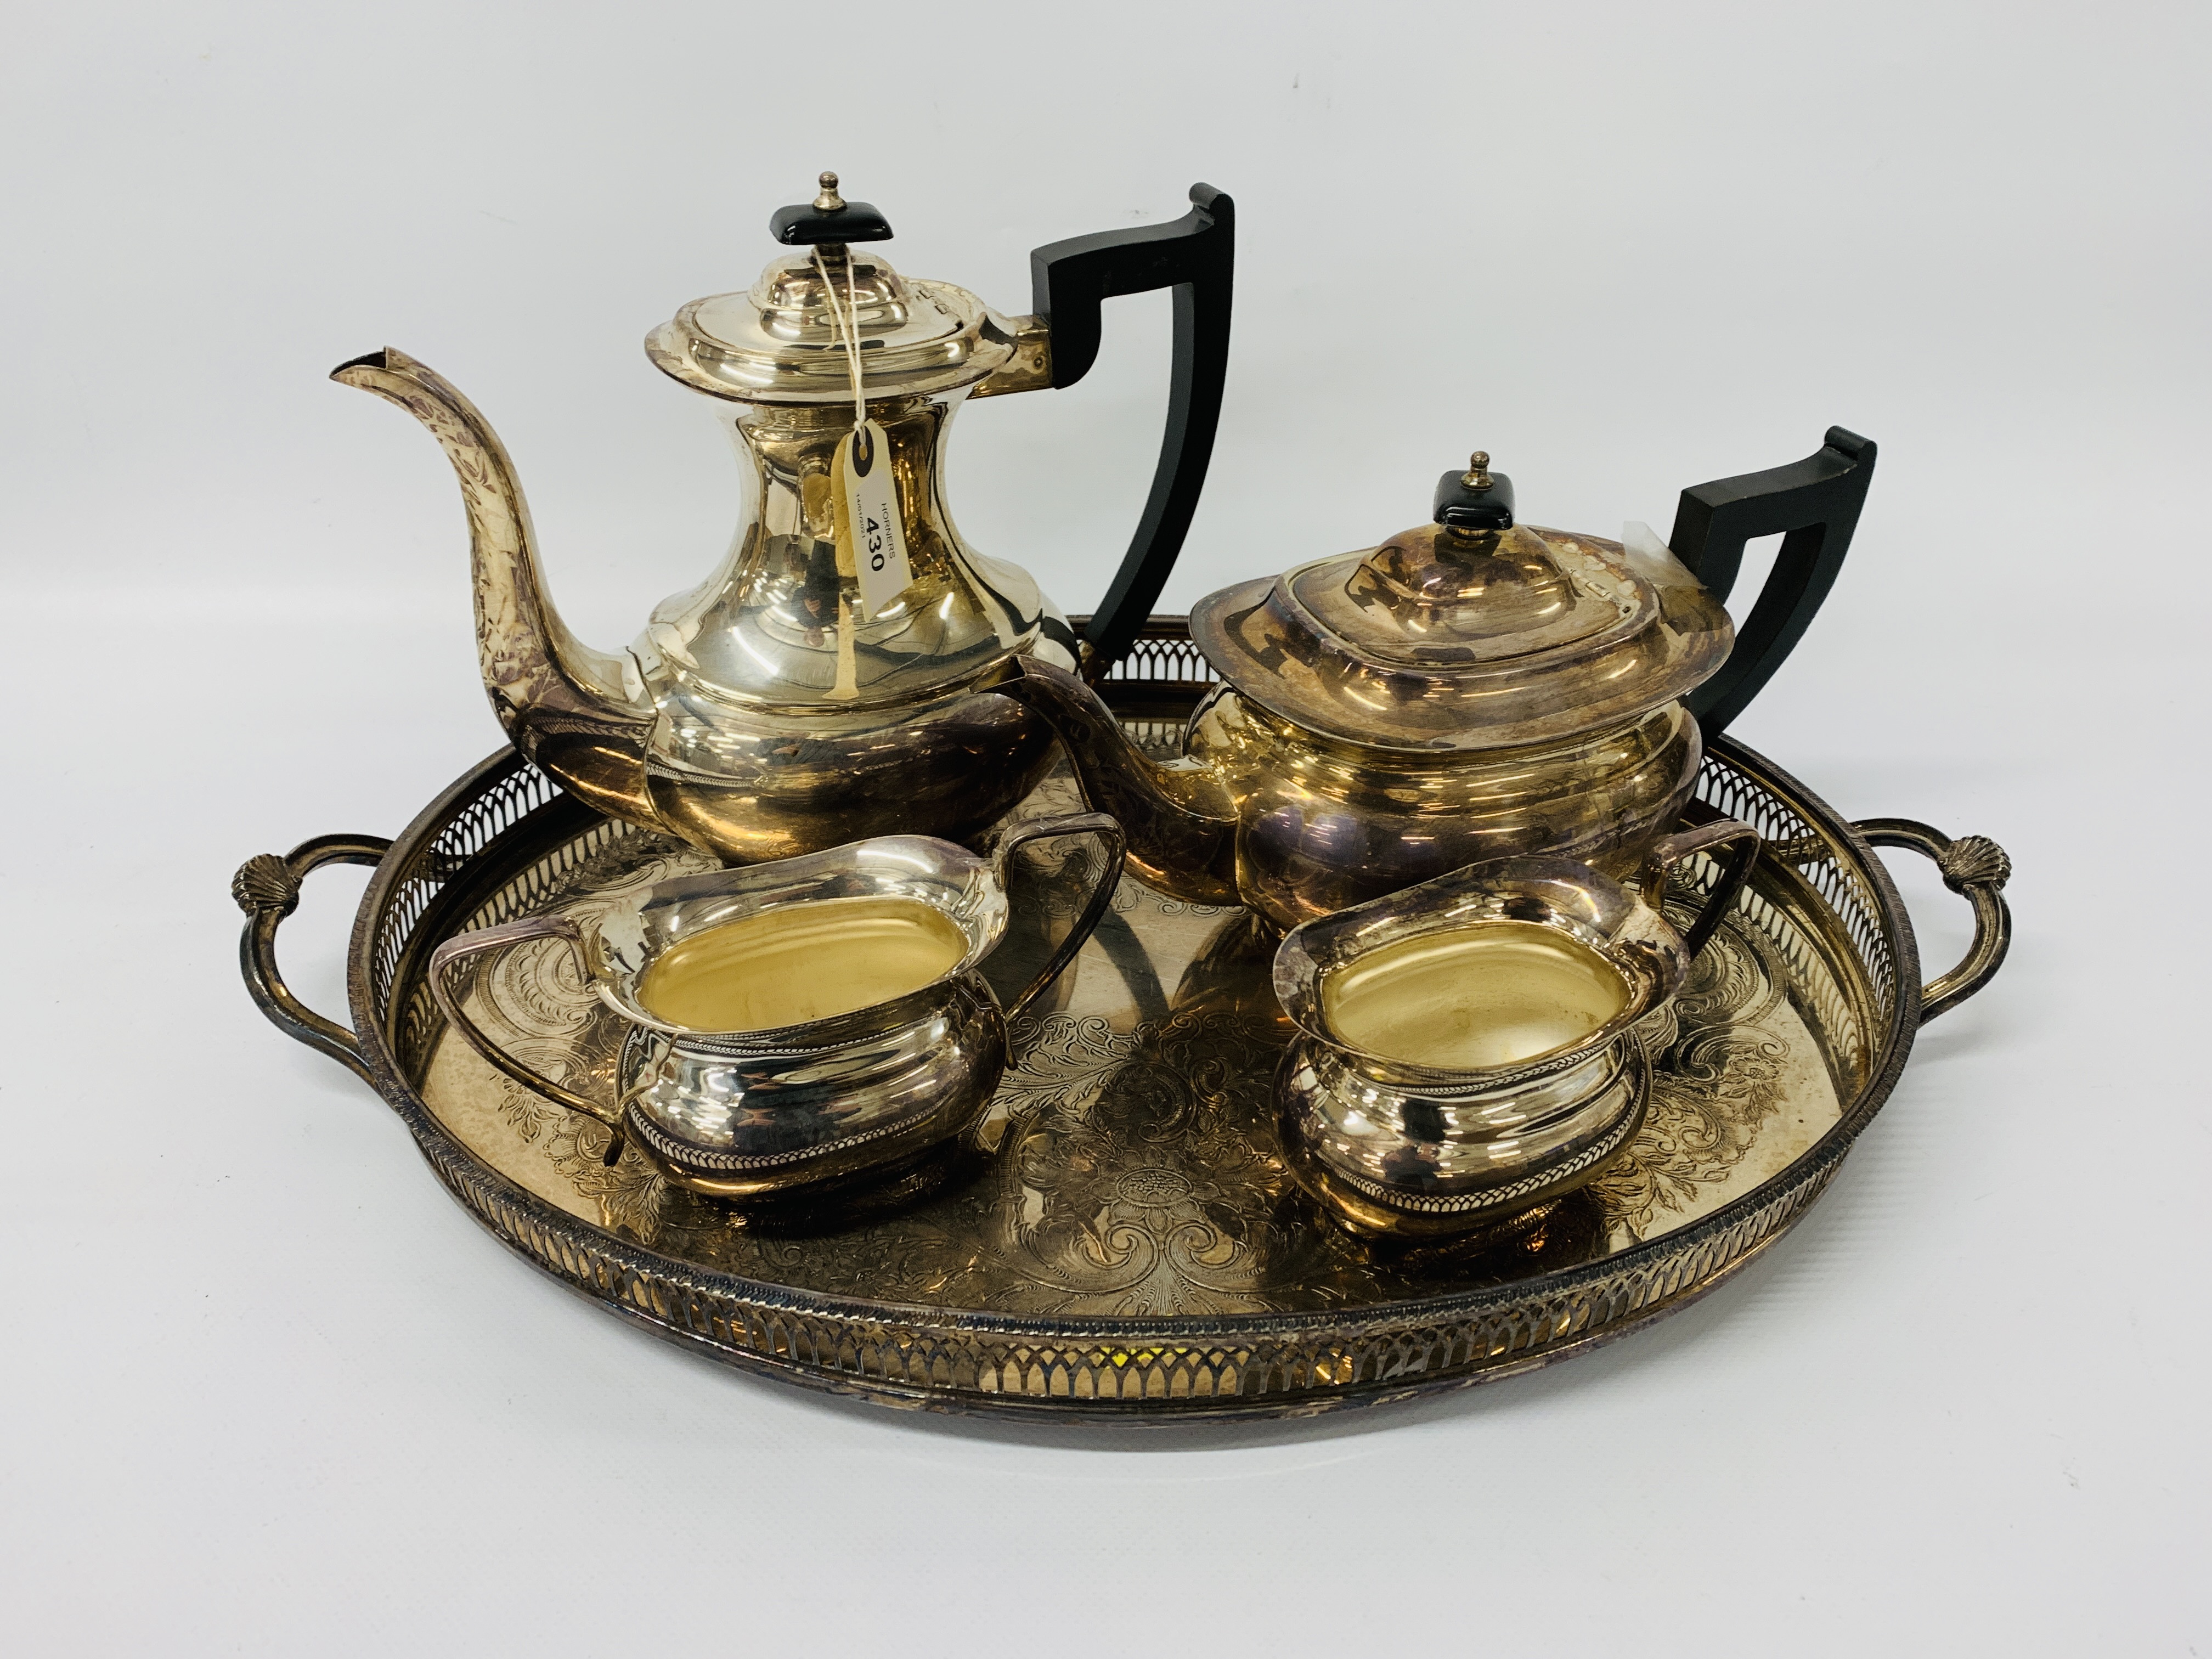 PLATED 4 PIECE TEASET TOGETHER WITH 2 HANDLED TRAY ENGRAVED DETAIL